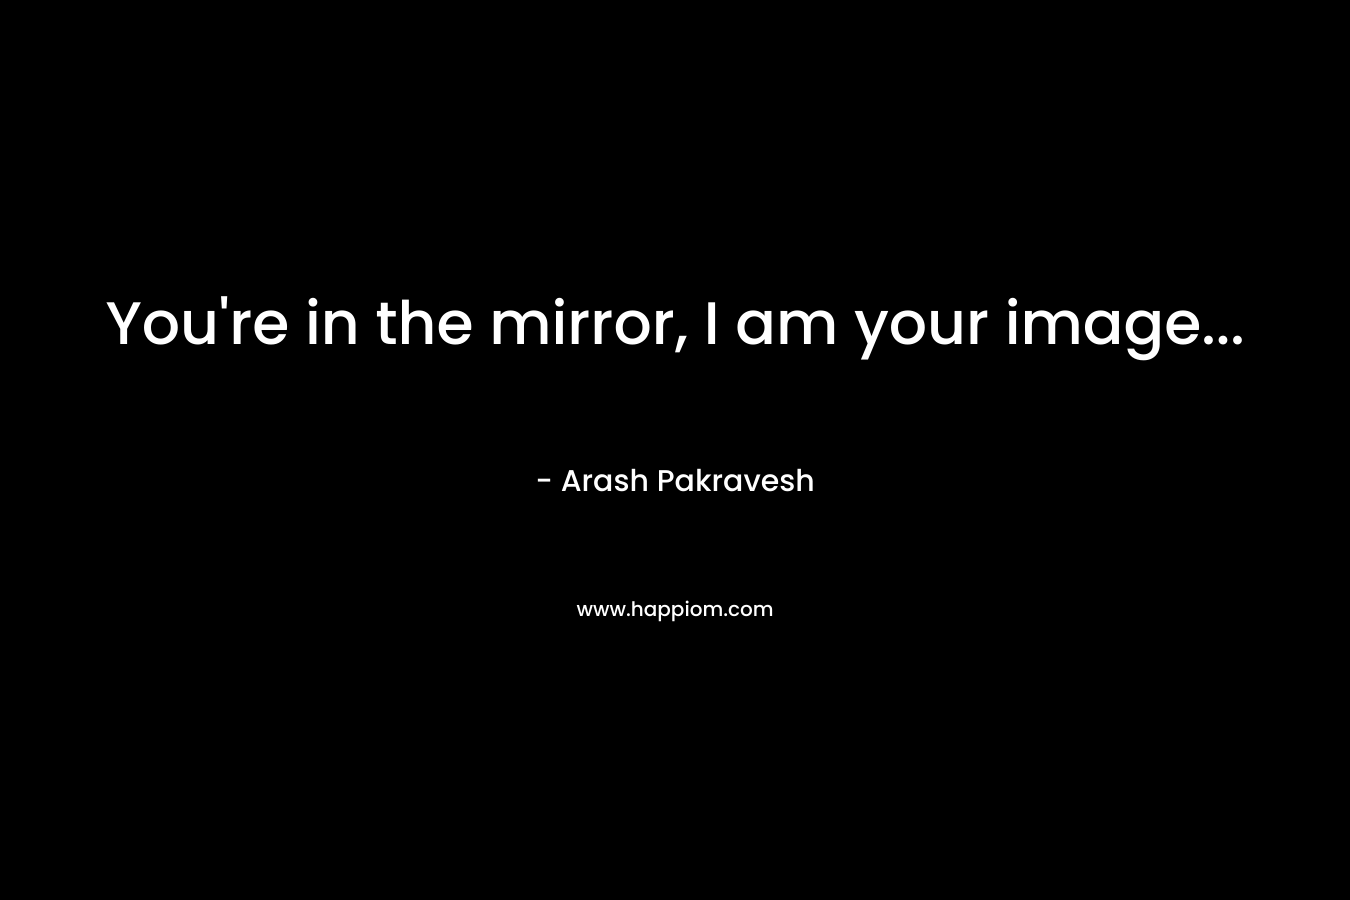 You're in the mirror, I am your image...